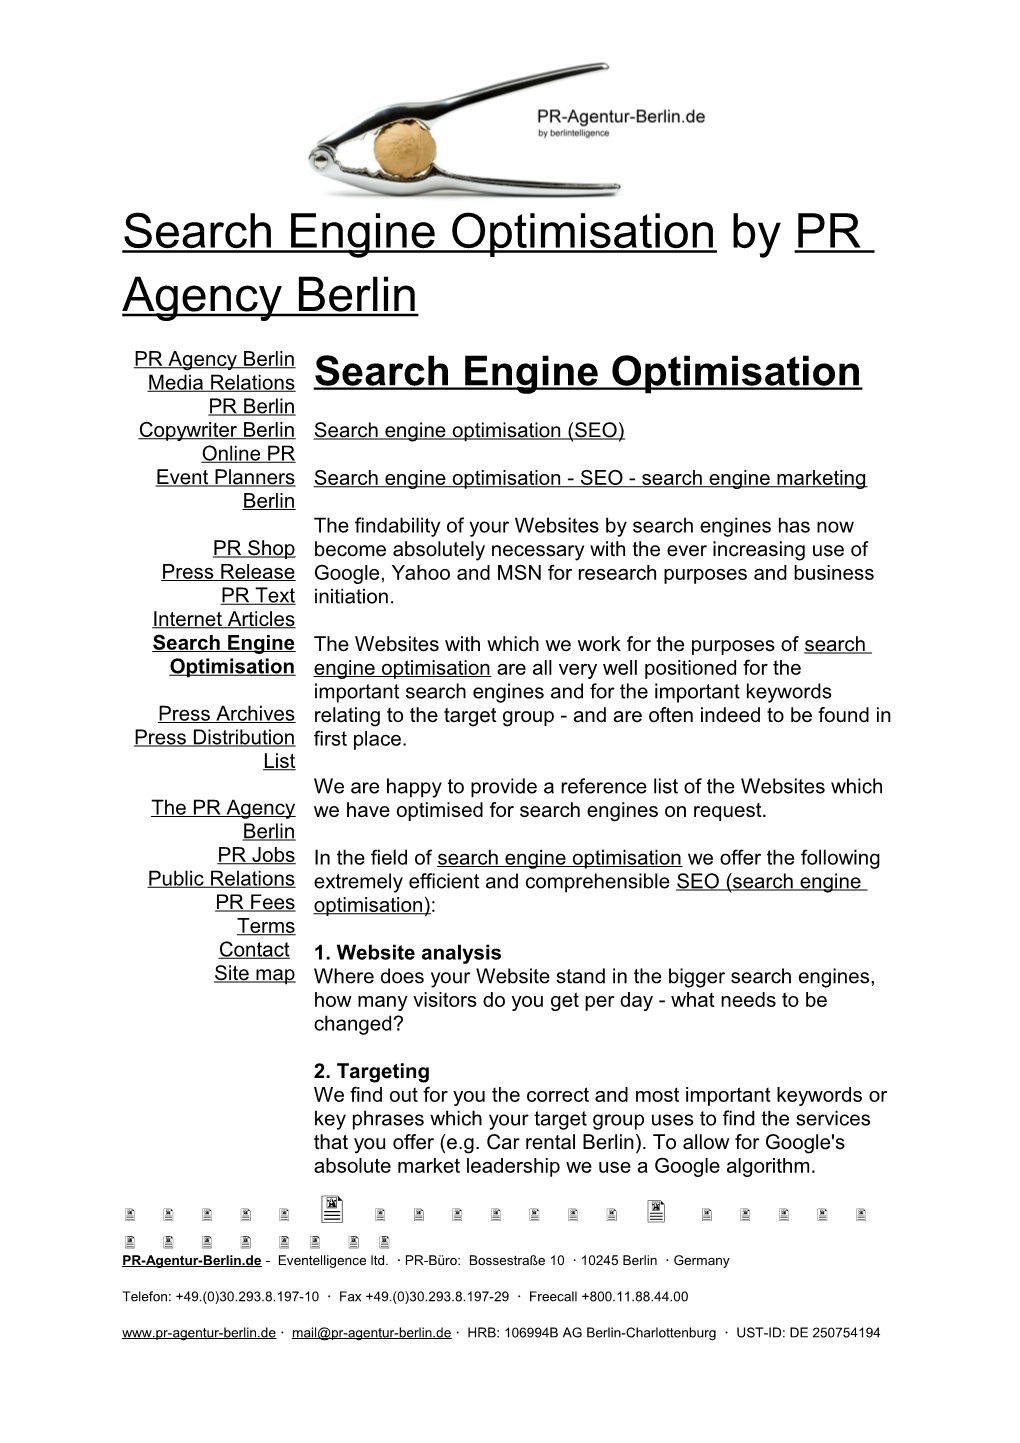 Search Engine Optimisation by PR Agency Berlin